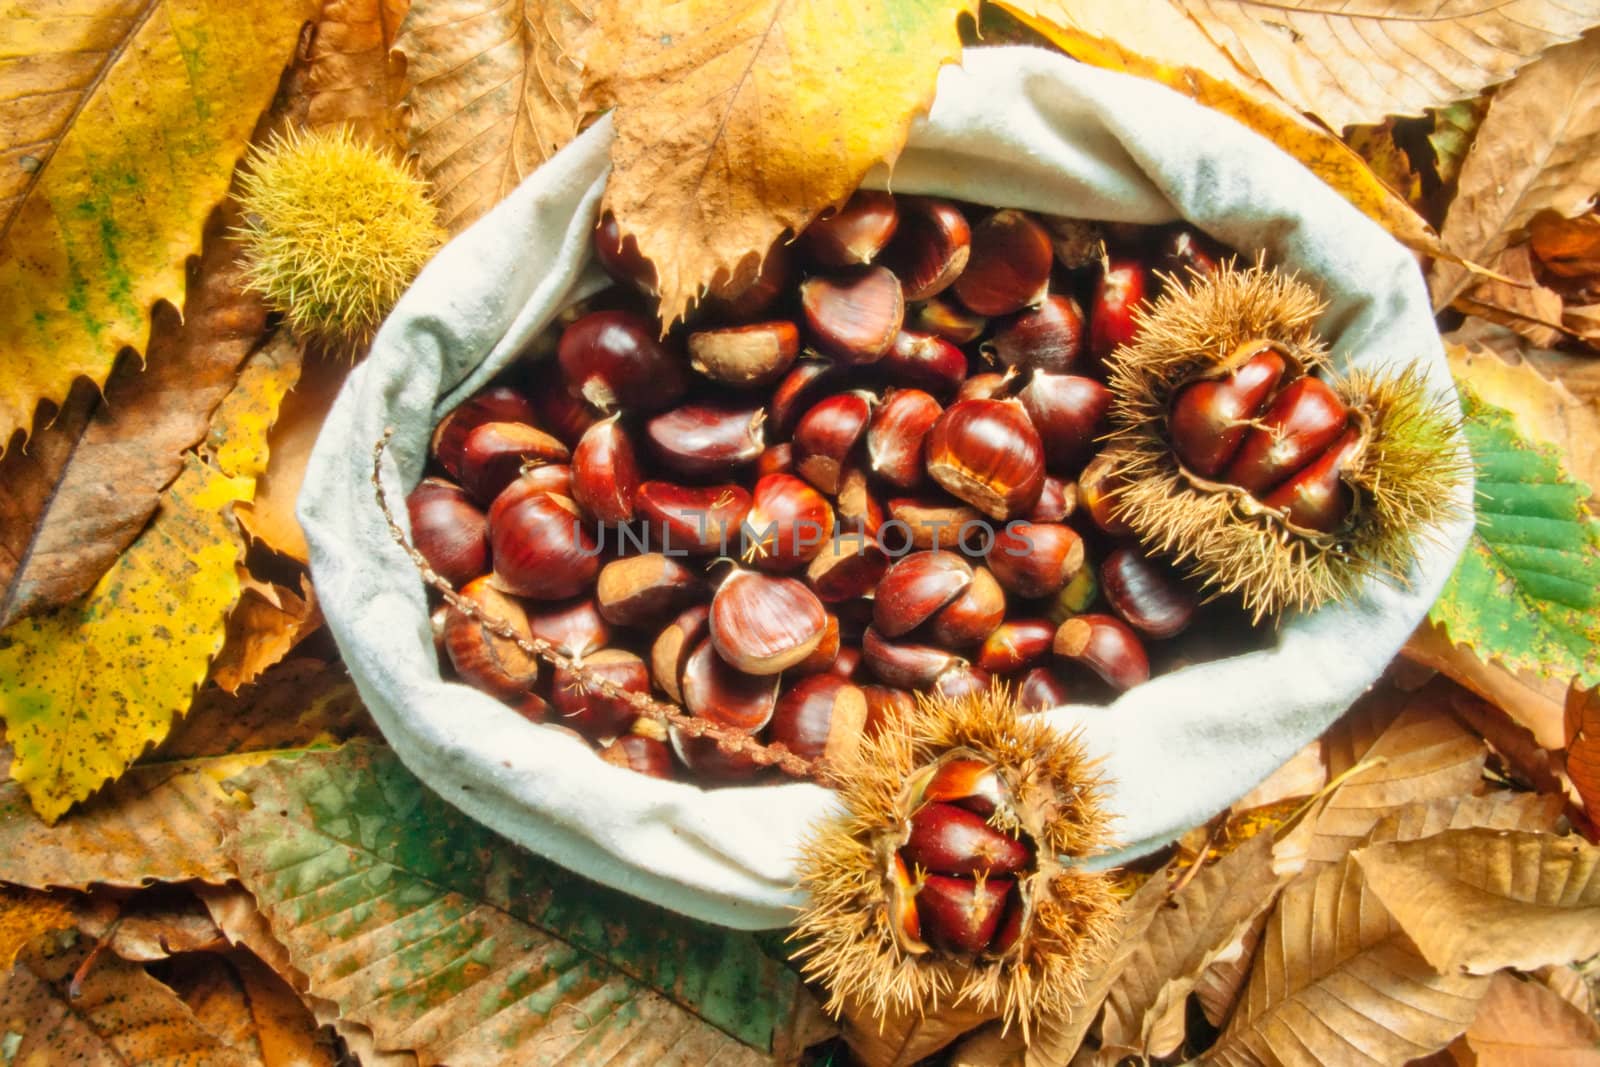 Bag of delicious chestnuts with leaves and husks by PiLens